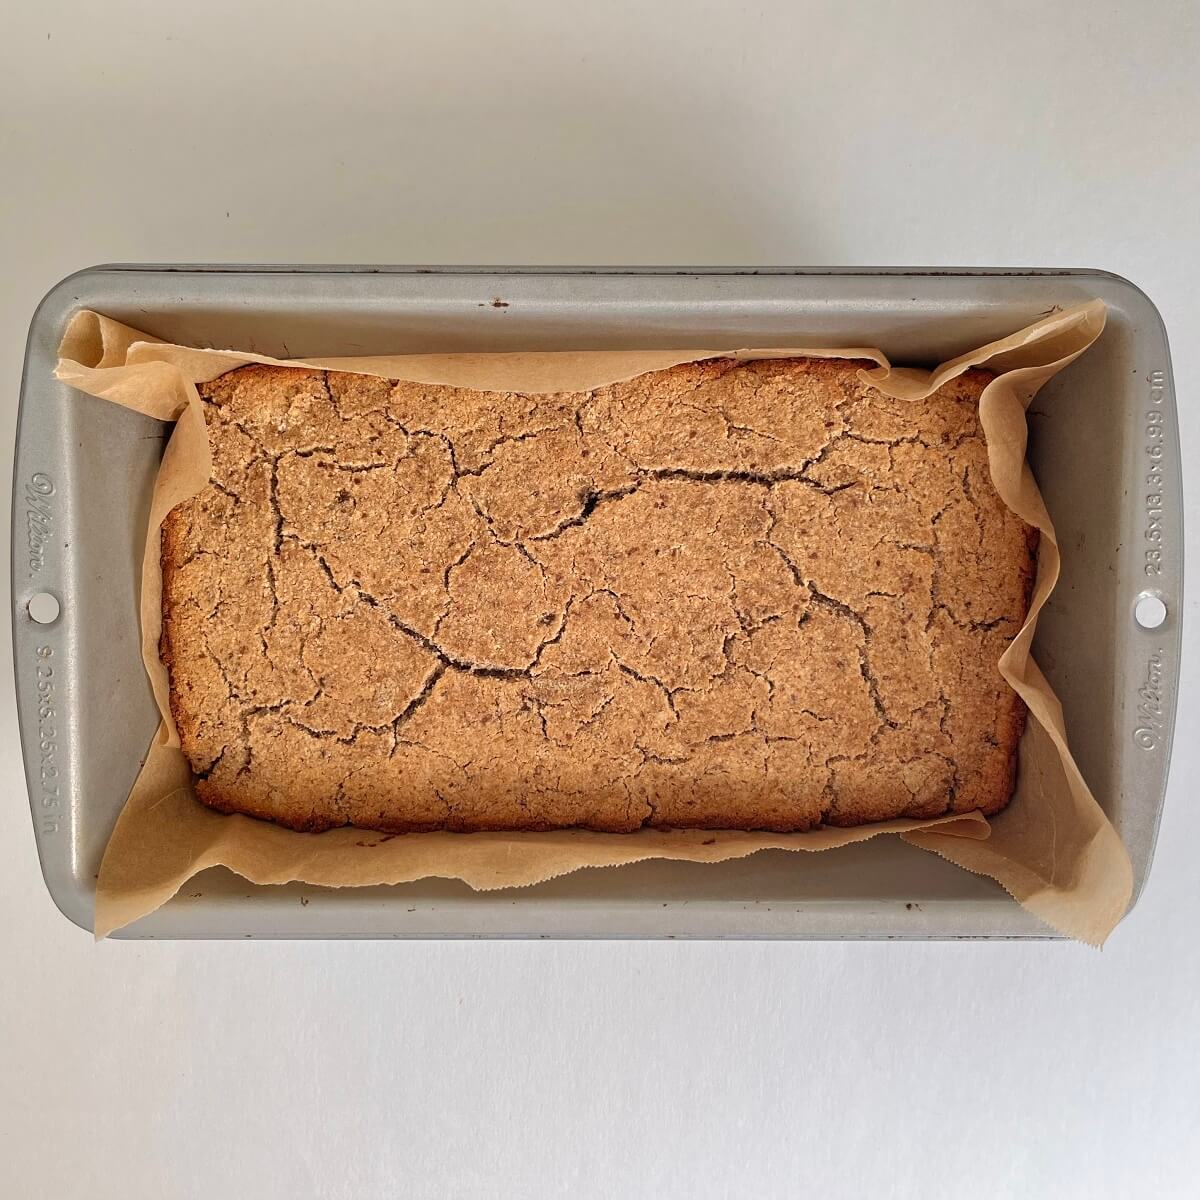 A loaf of freshly baked banana bread in a metal pan lined with parchment paper.